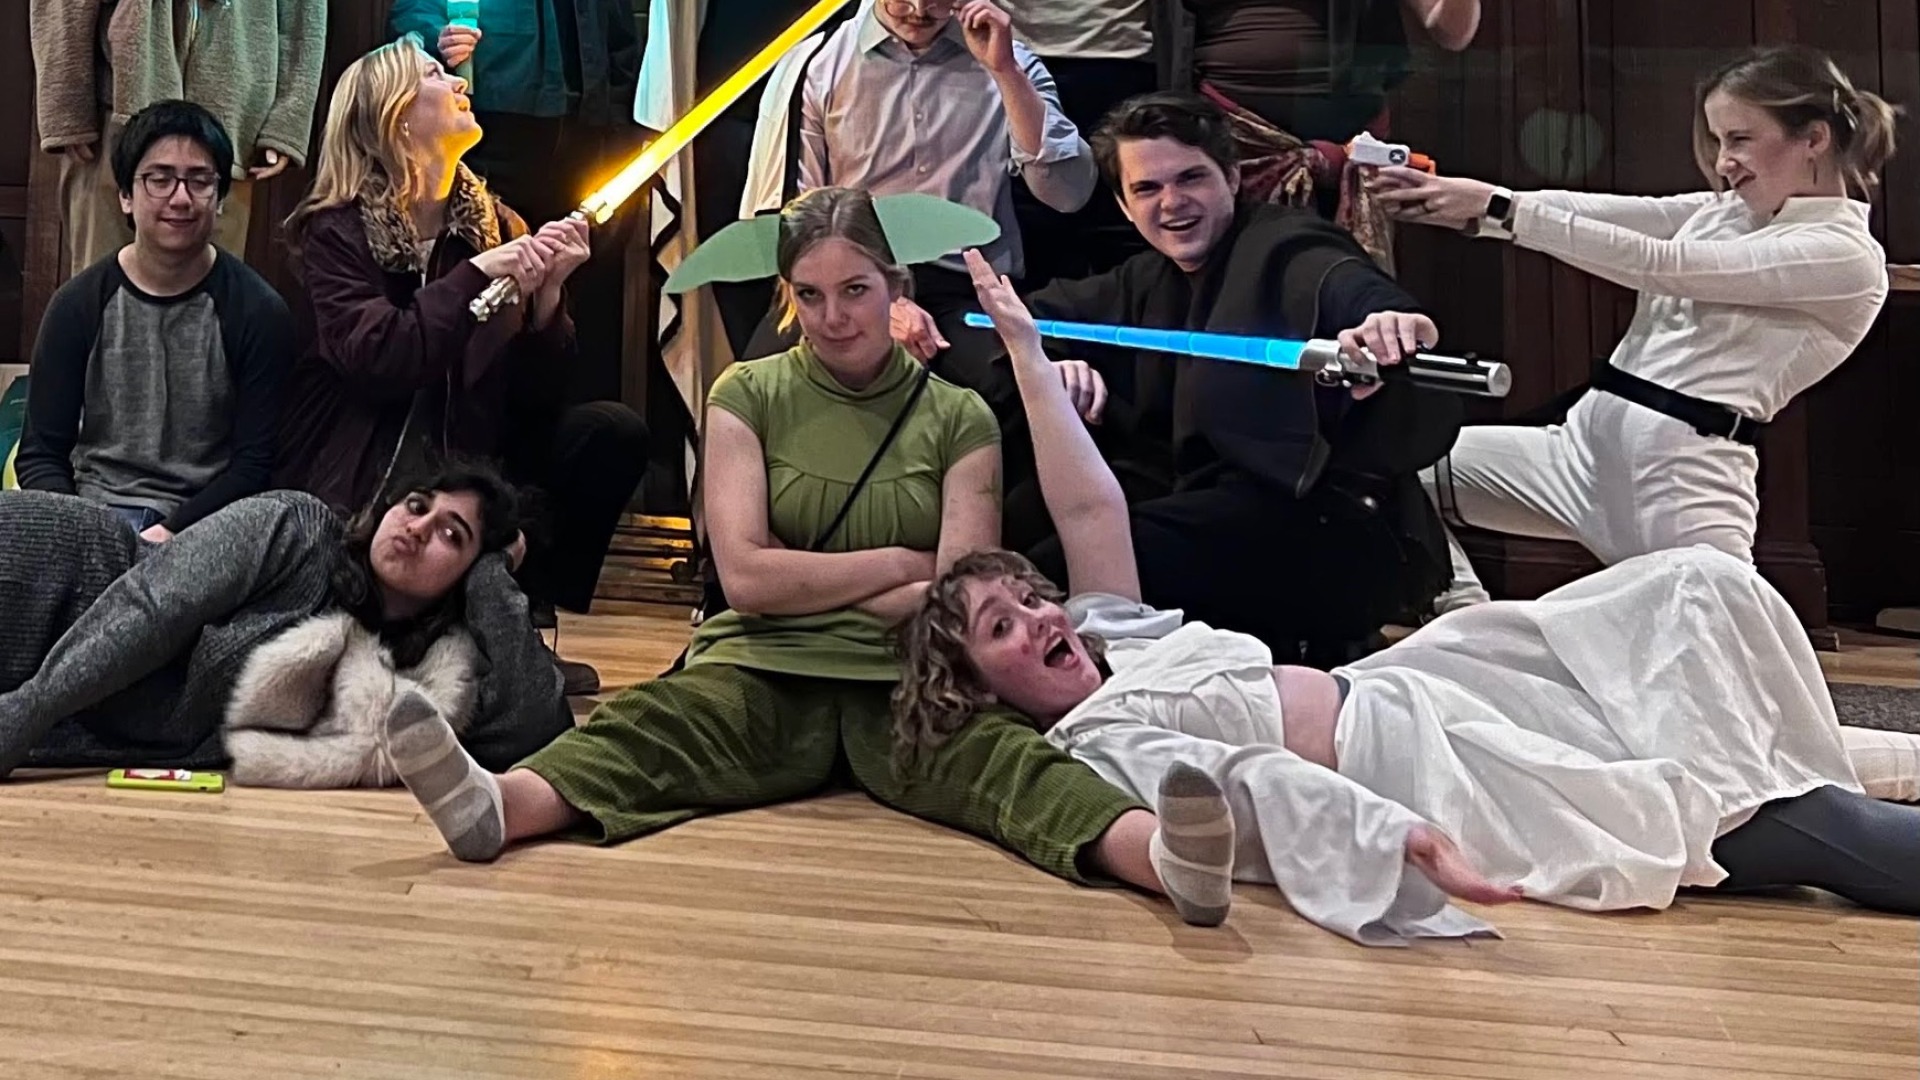 My friends and I, goofing around with light sabers in a group photo